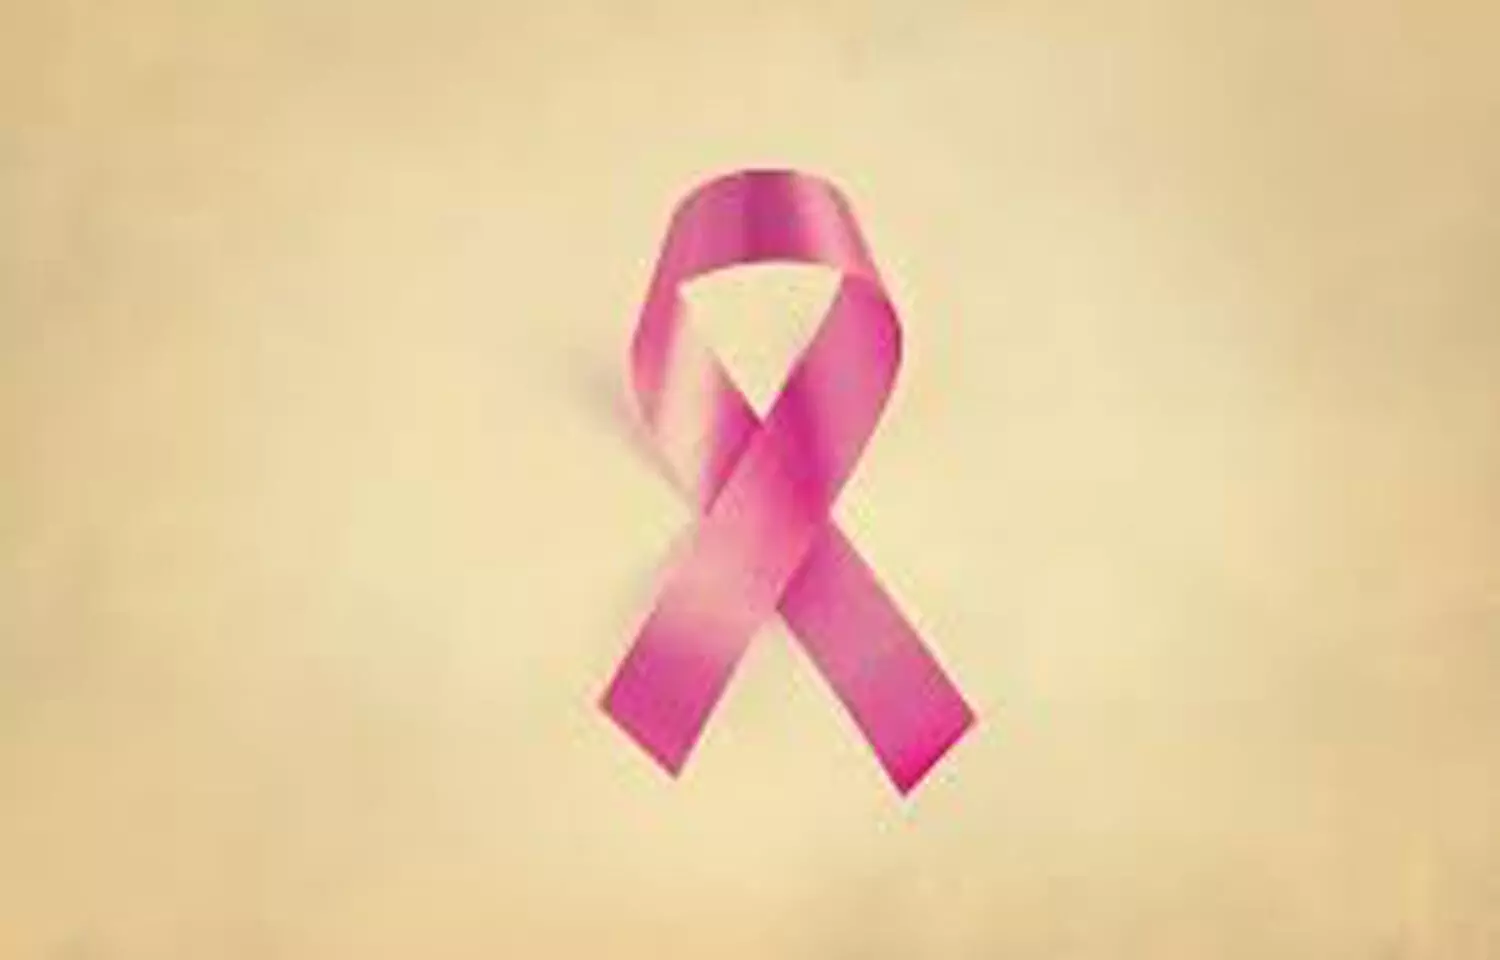 Hair loss drug Spironolactone not tied to recurrence risk in breast cancer patients